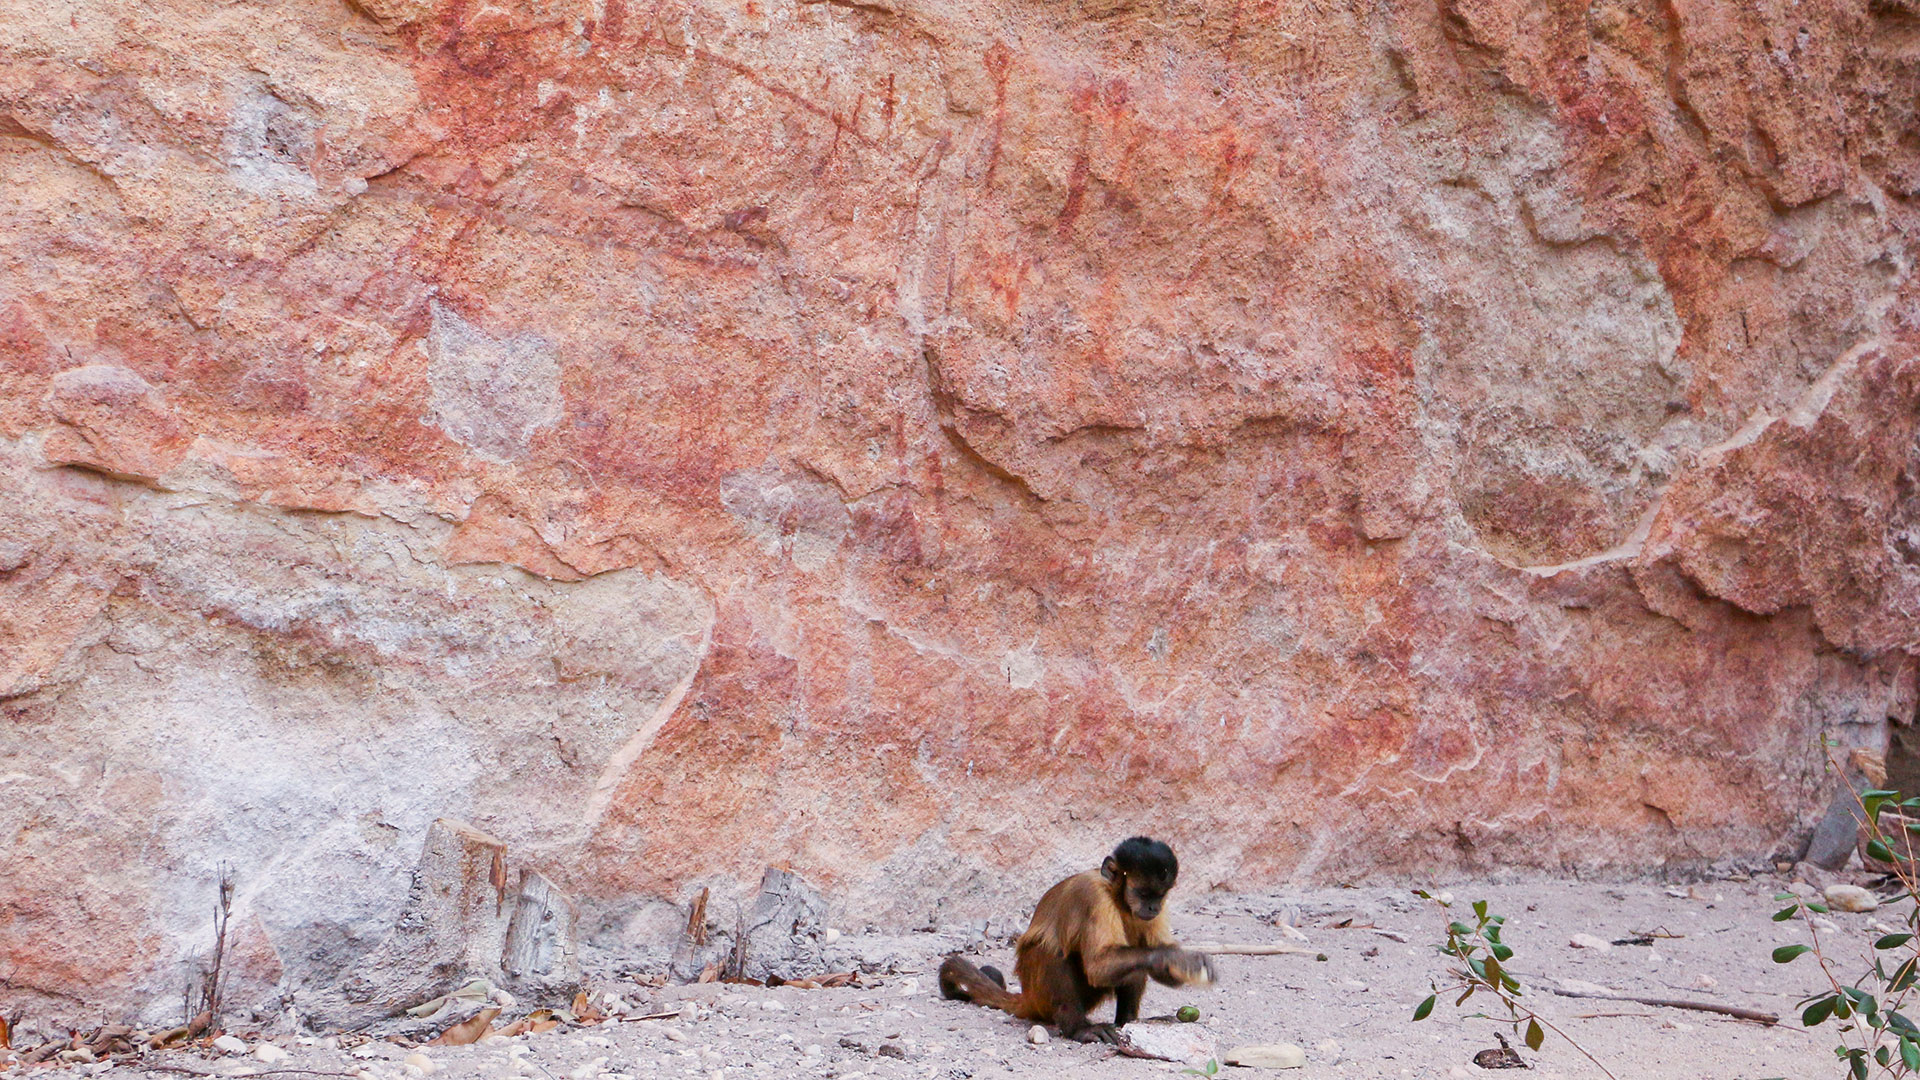 A capuchin monkey breaks fruit using a rock as a hammer and another as an anvil at an archaeological site with cave paintings in Northeast Brazil/Tiago Falótico.